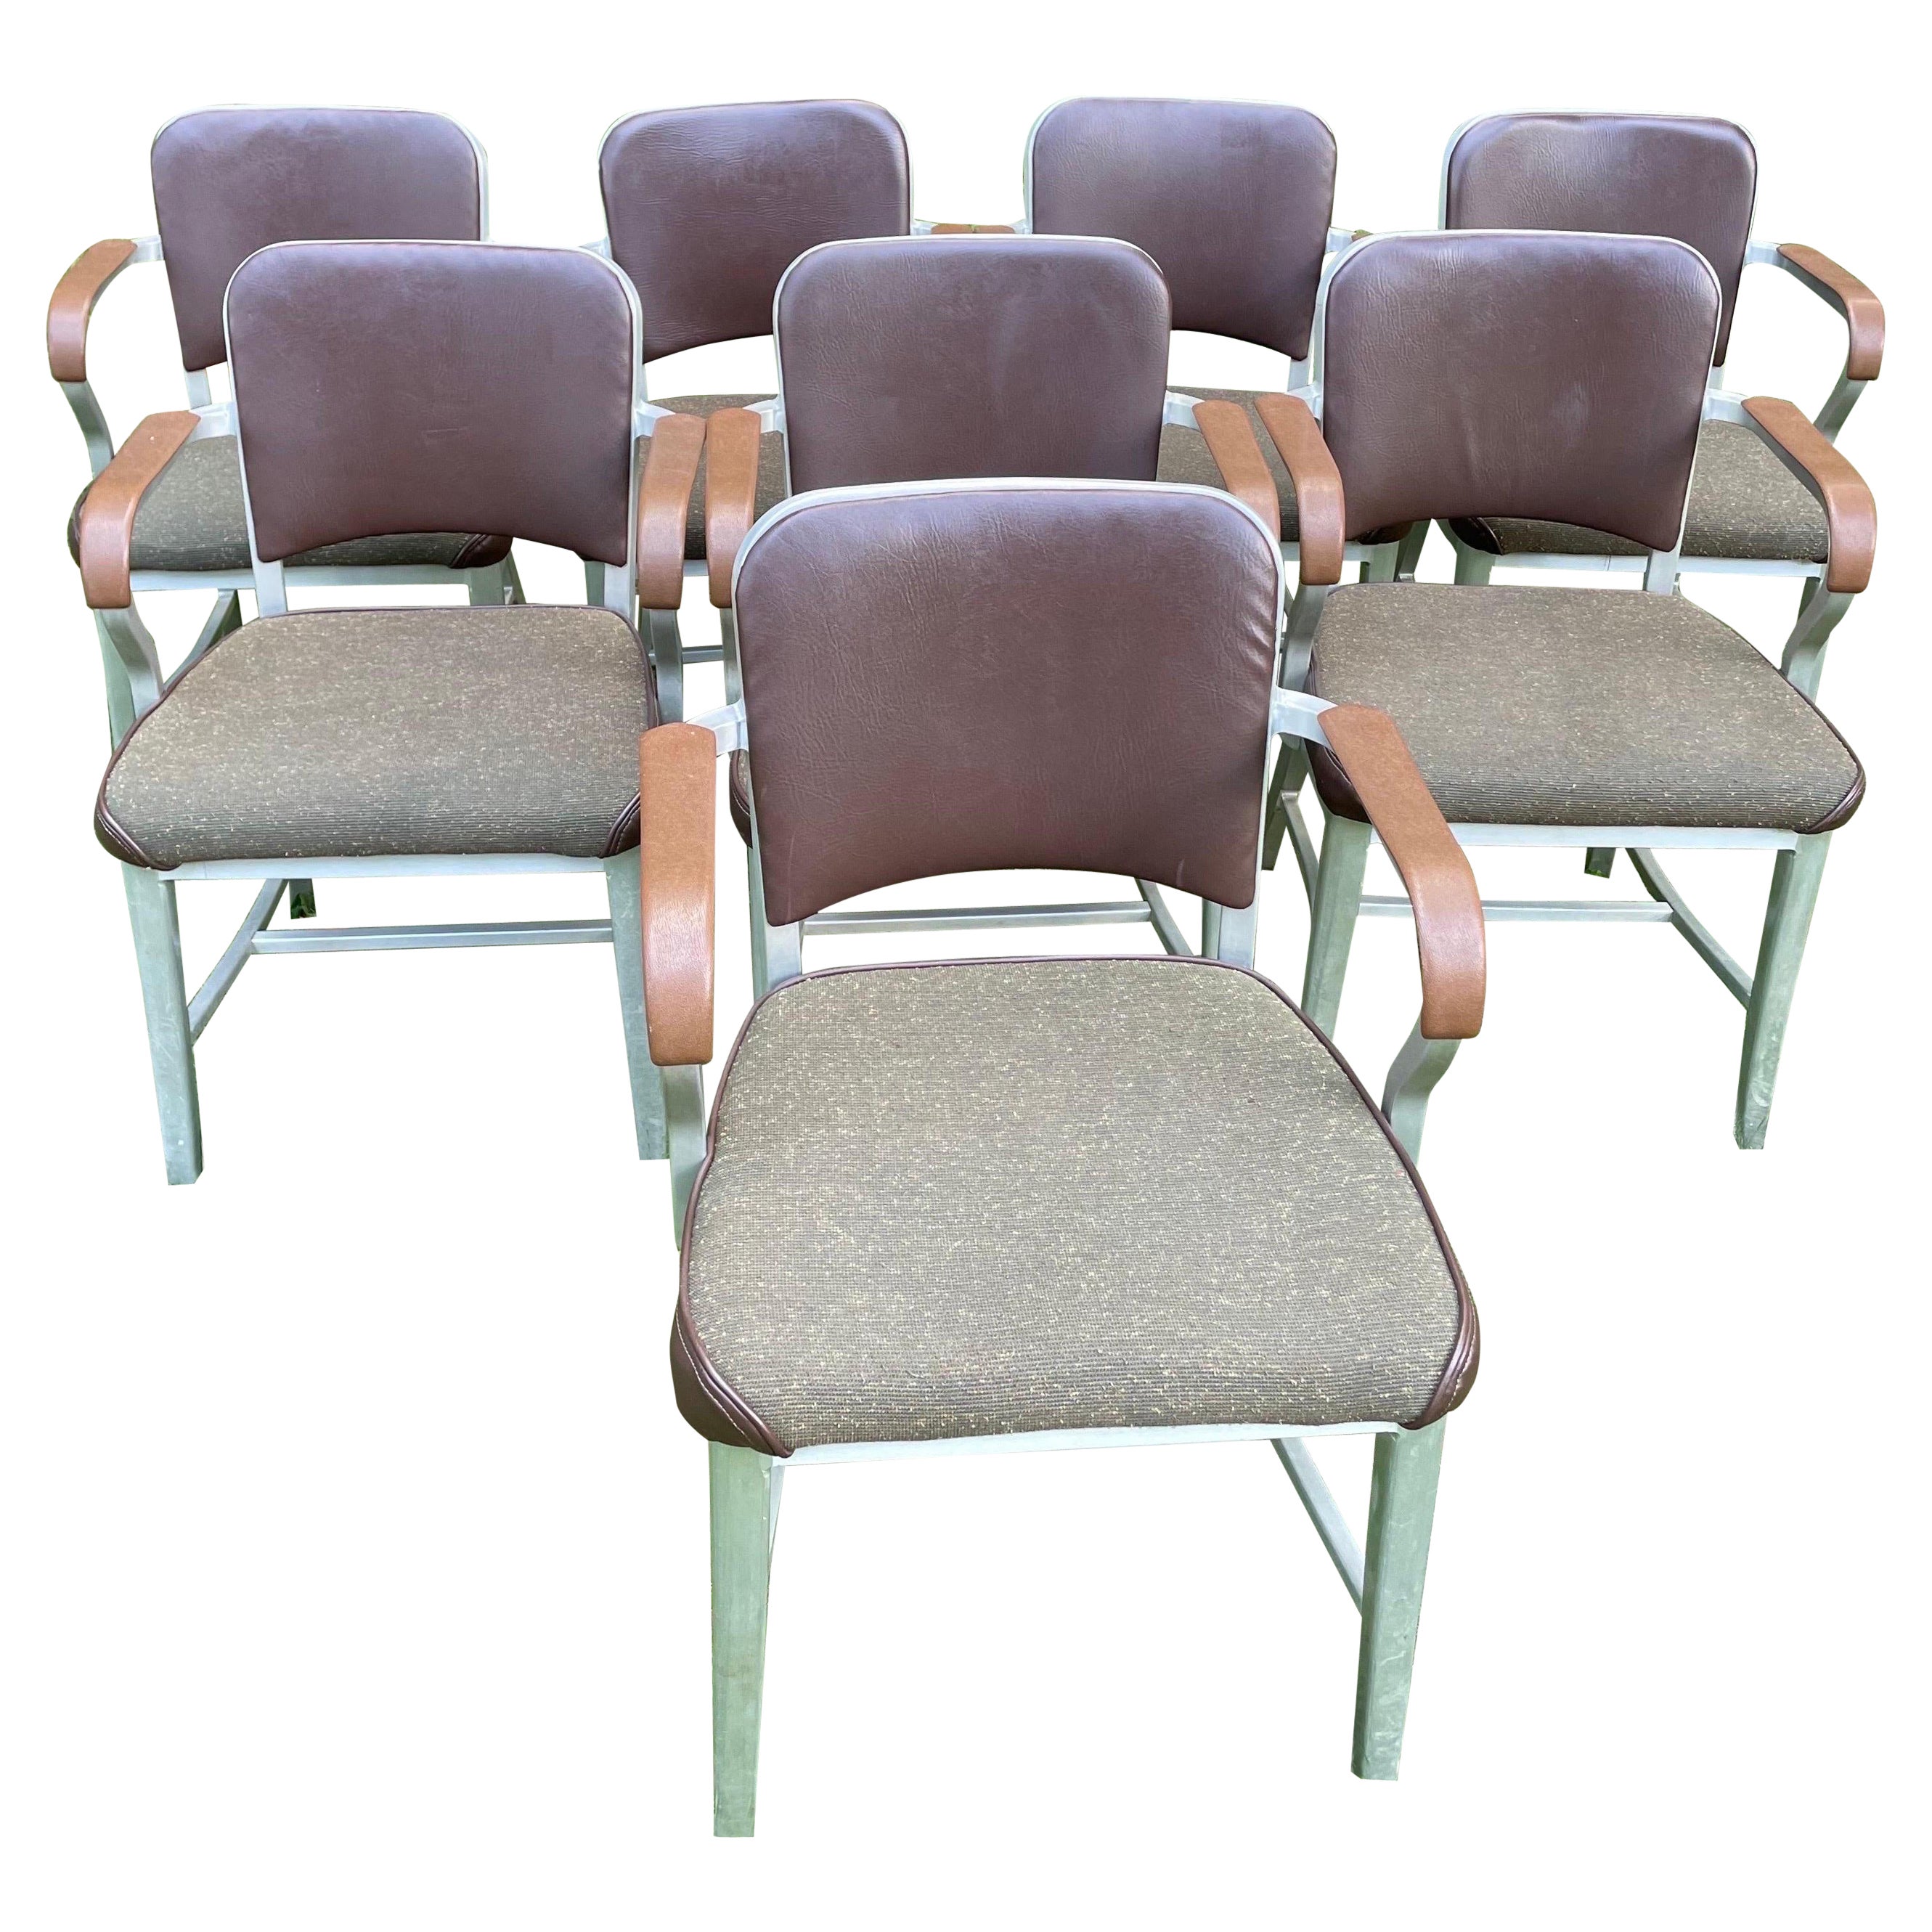 Set of Eight Vintage Emeco Aluminum Arm Chairs